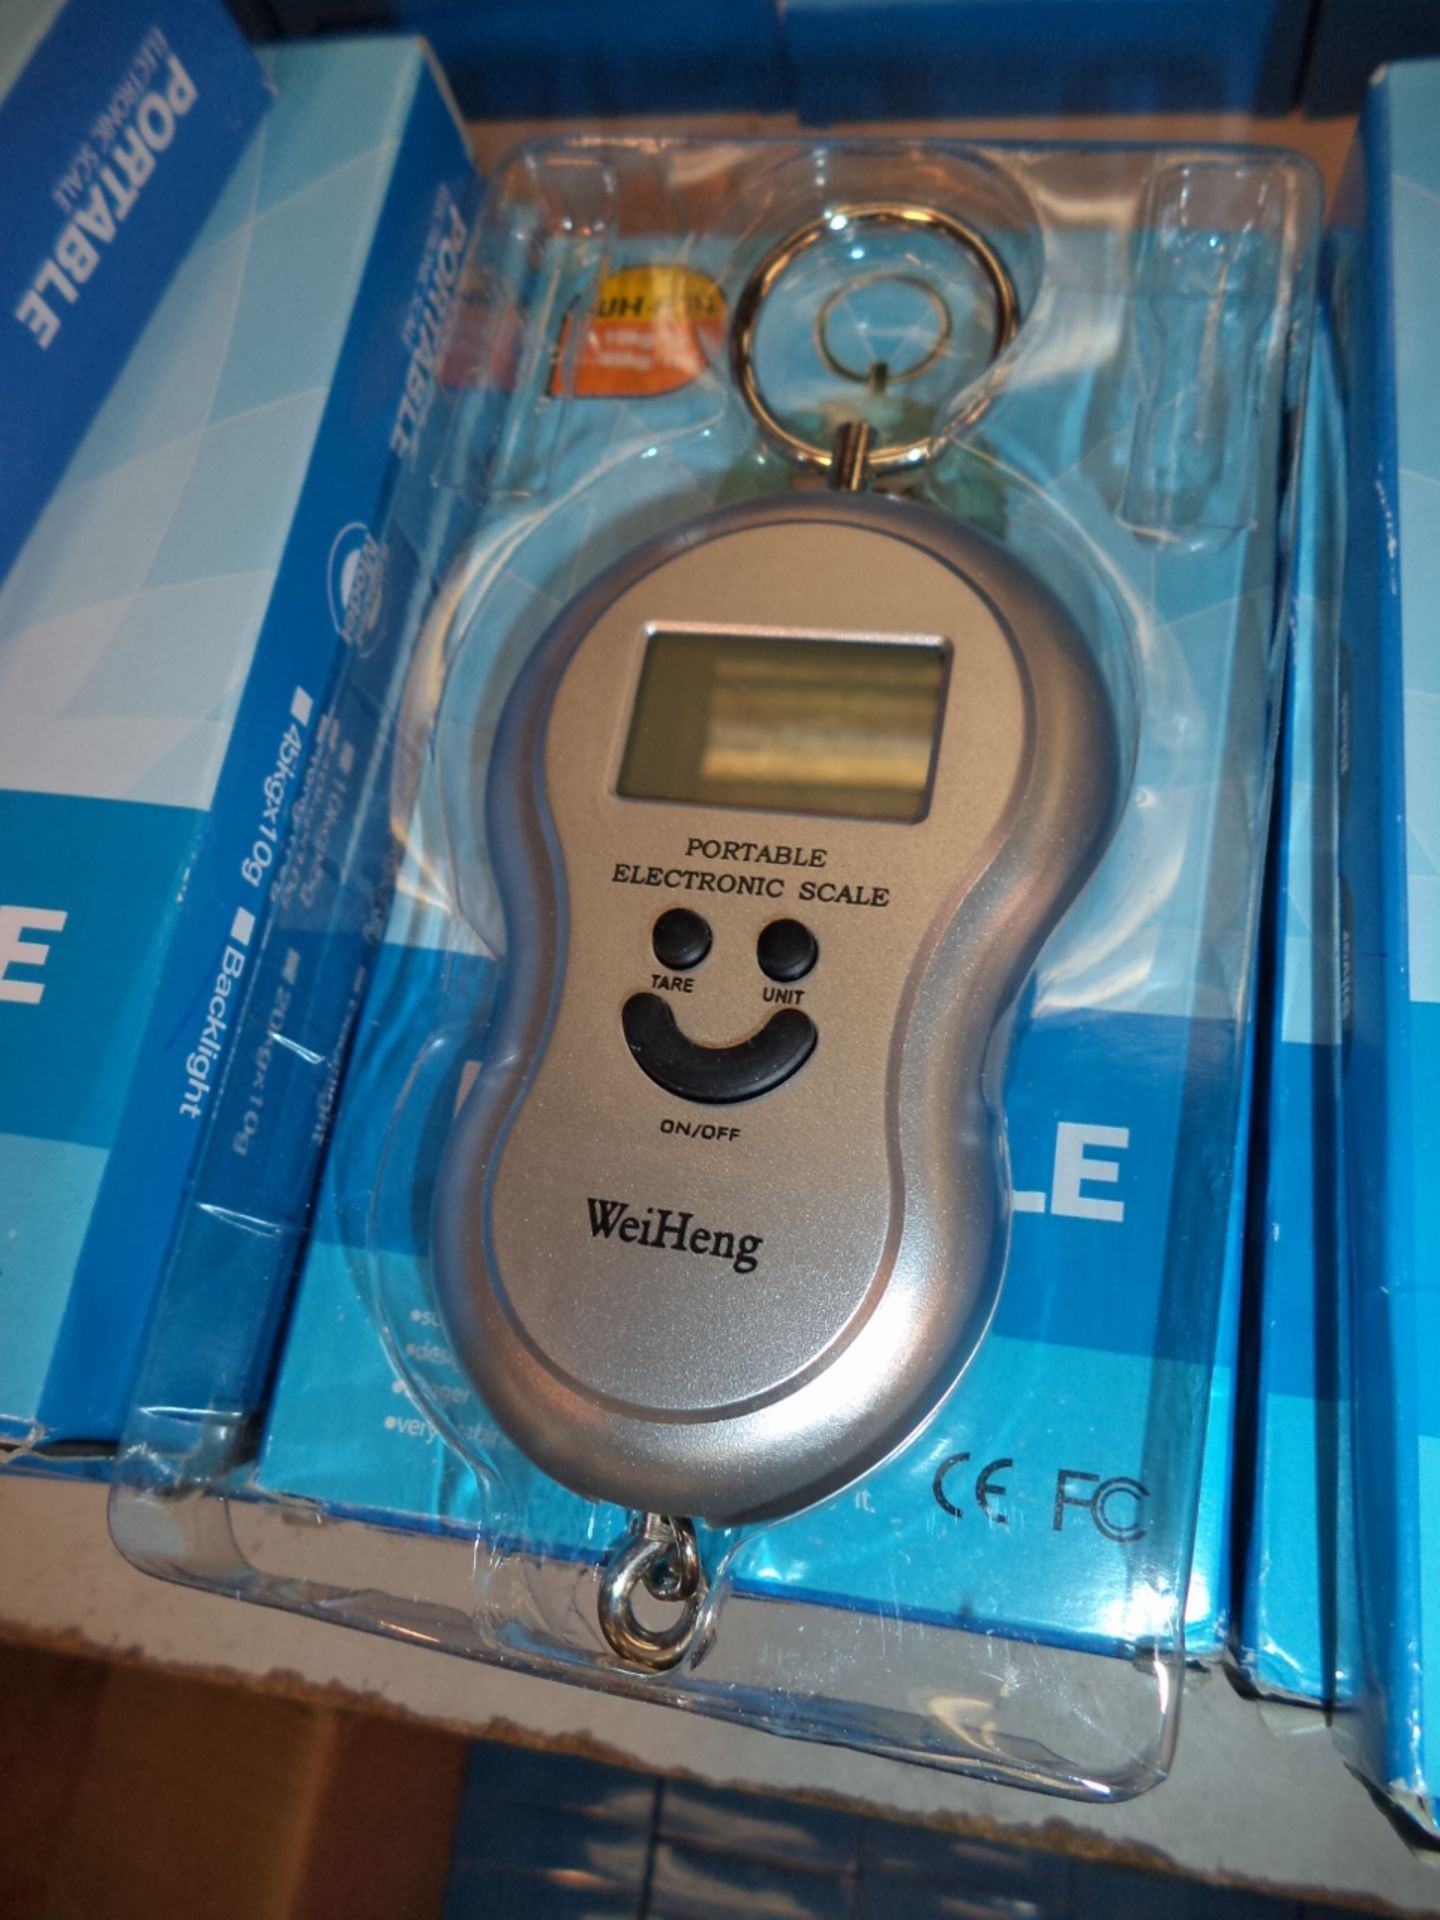 20 off portable electronic digital scales, weight capacity 0-10kg in 5g increments and 10-45kg in - Image 2 of 3